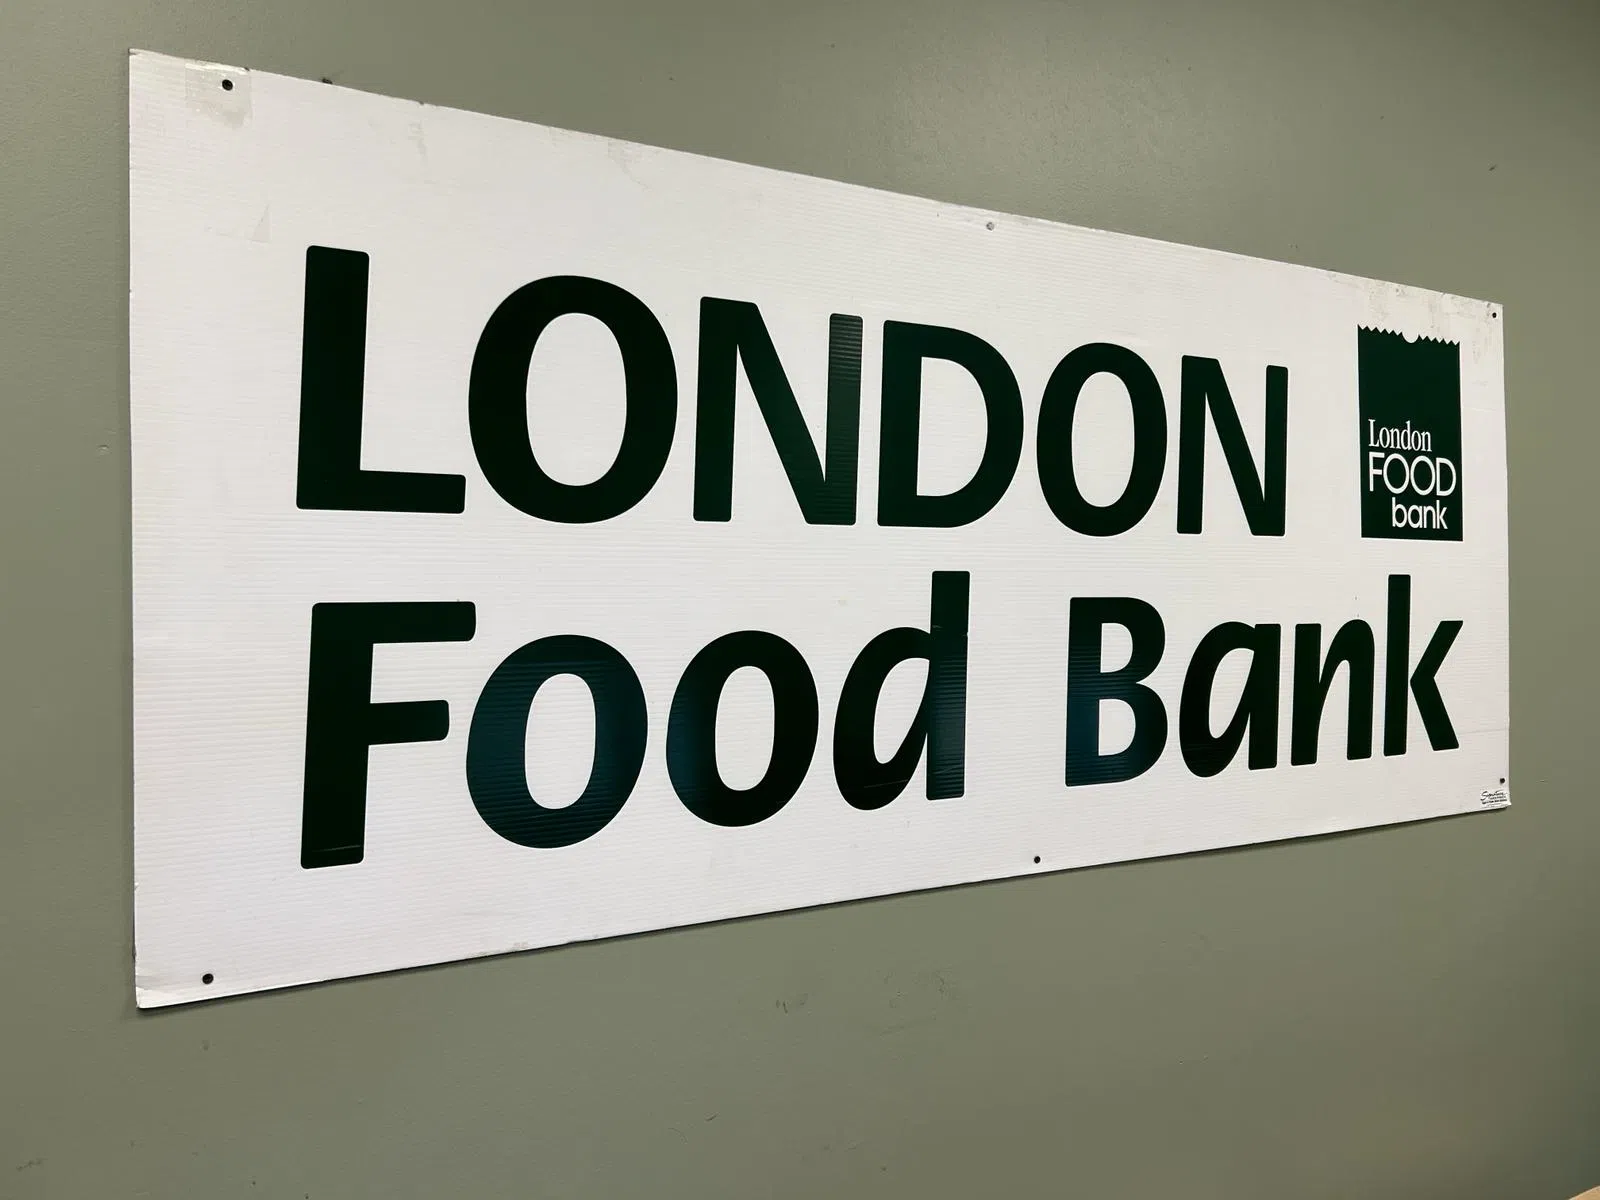 London Food Bank, Meeting Increased Need Through Community Support and Innovative Programs